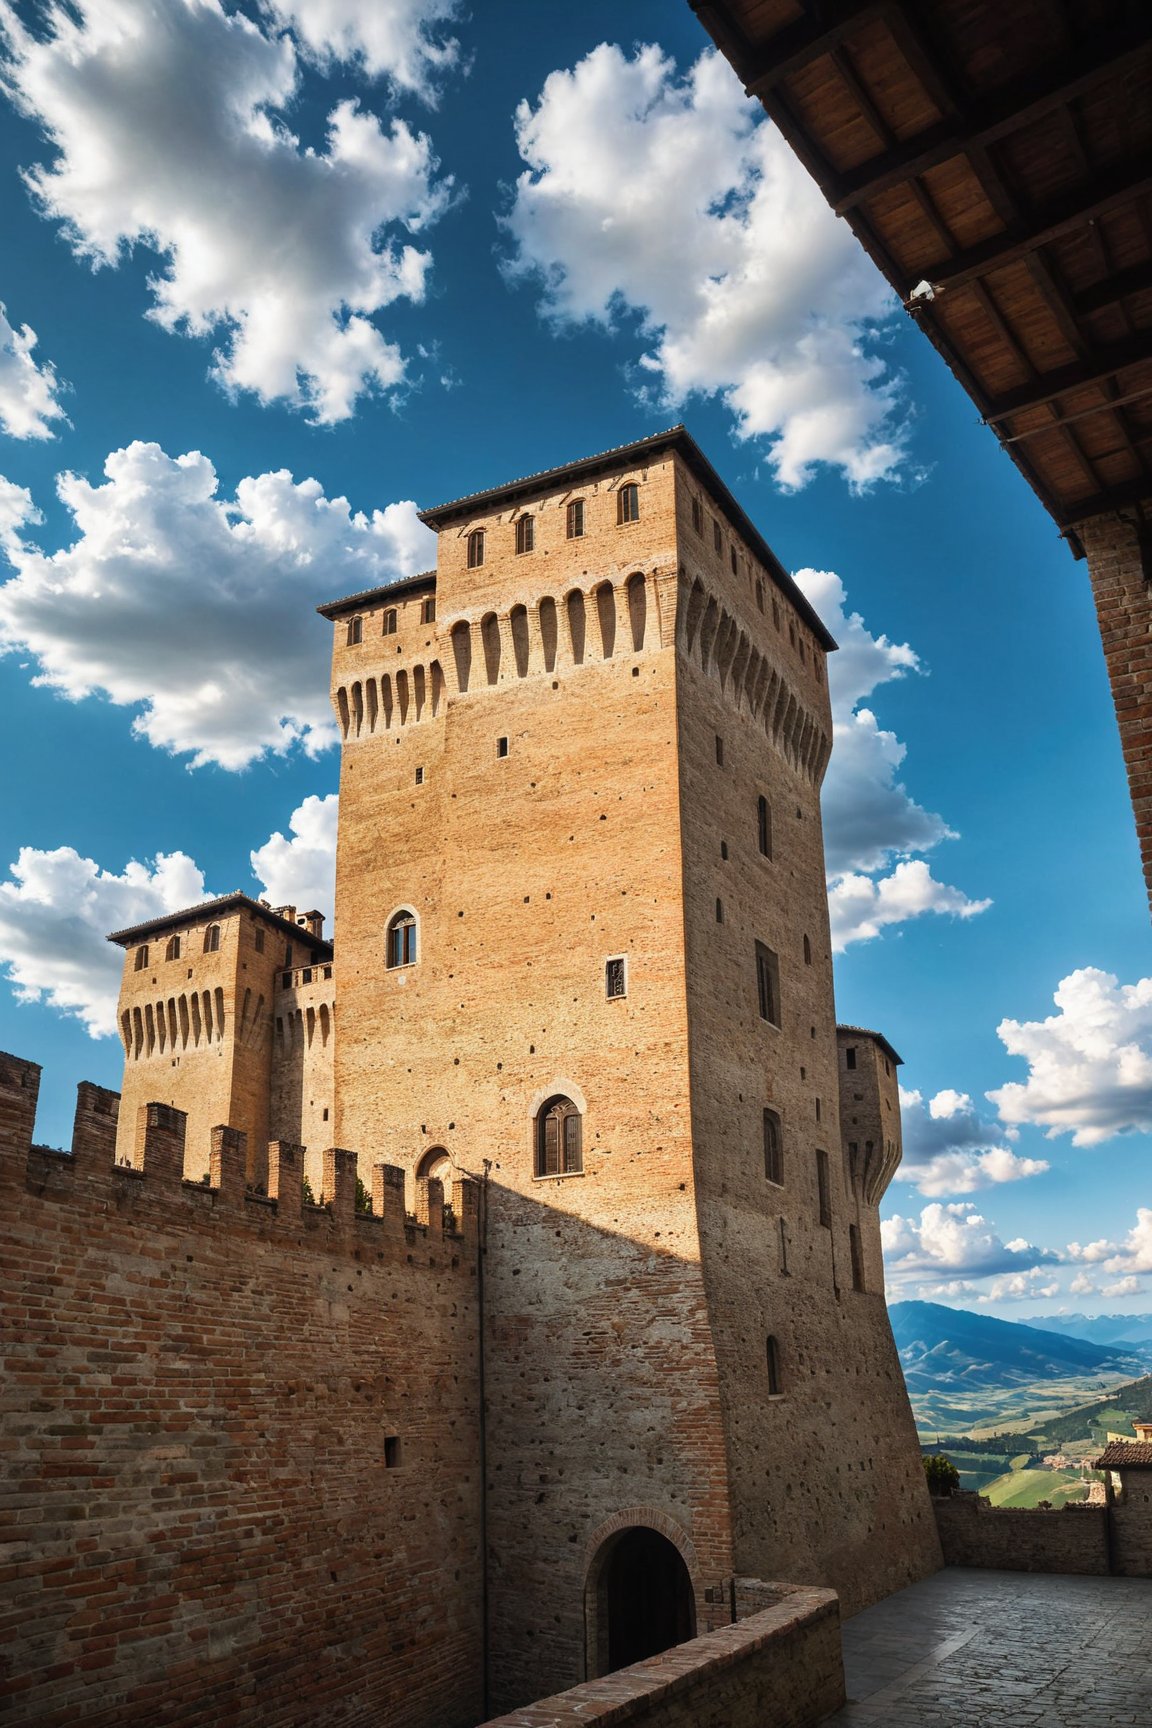 (Documentary photograph:1.3) of a wonderful (medieval castle in Italy:1.4), 14th century, (golden ratio:1.3), (medieval architecture:1.3),(mullioned windows:1.3),(brick wall:1.1), (towers with merlons:1.2), (set on top of a hill overlooking a valley:1.2), beautiful blue sky with imposing cumulonembus clouds, BREAK (aerial view:1.2), shot on Canon EOS 5D, from below, Fujicolor Pro film, in the style of Miko Lagerstedt/Liam Wong/Nan Goldin/Lee Friedlander, (photorealistic:1.3), (soft diffused lighting:1.2), vignette, highest quality, original shot. BREAK Front view, well-lit, (perfect focus:1.2), award winning, detailed and intricate, masterpiece, itacstl,real_booster,itacstl